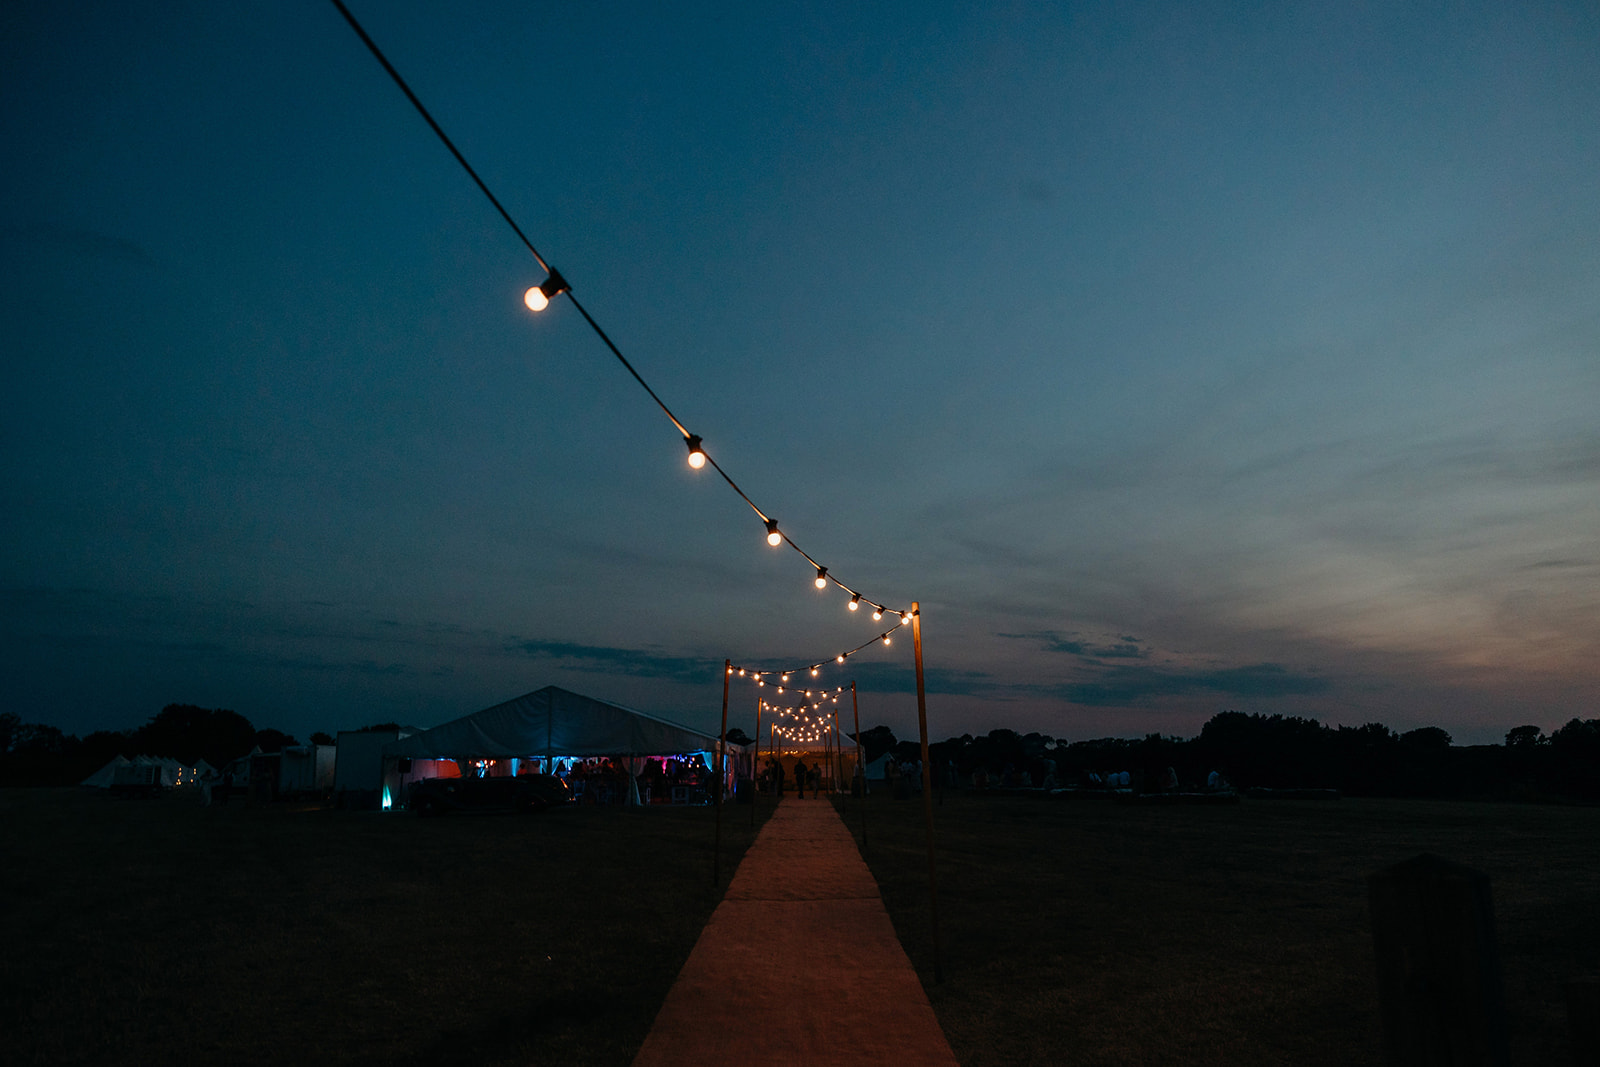 sunsets at Marquee wedding festoon lighting lights the way to the marquee